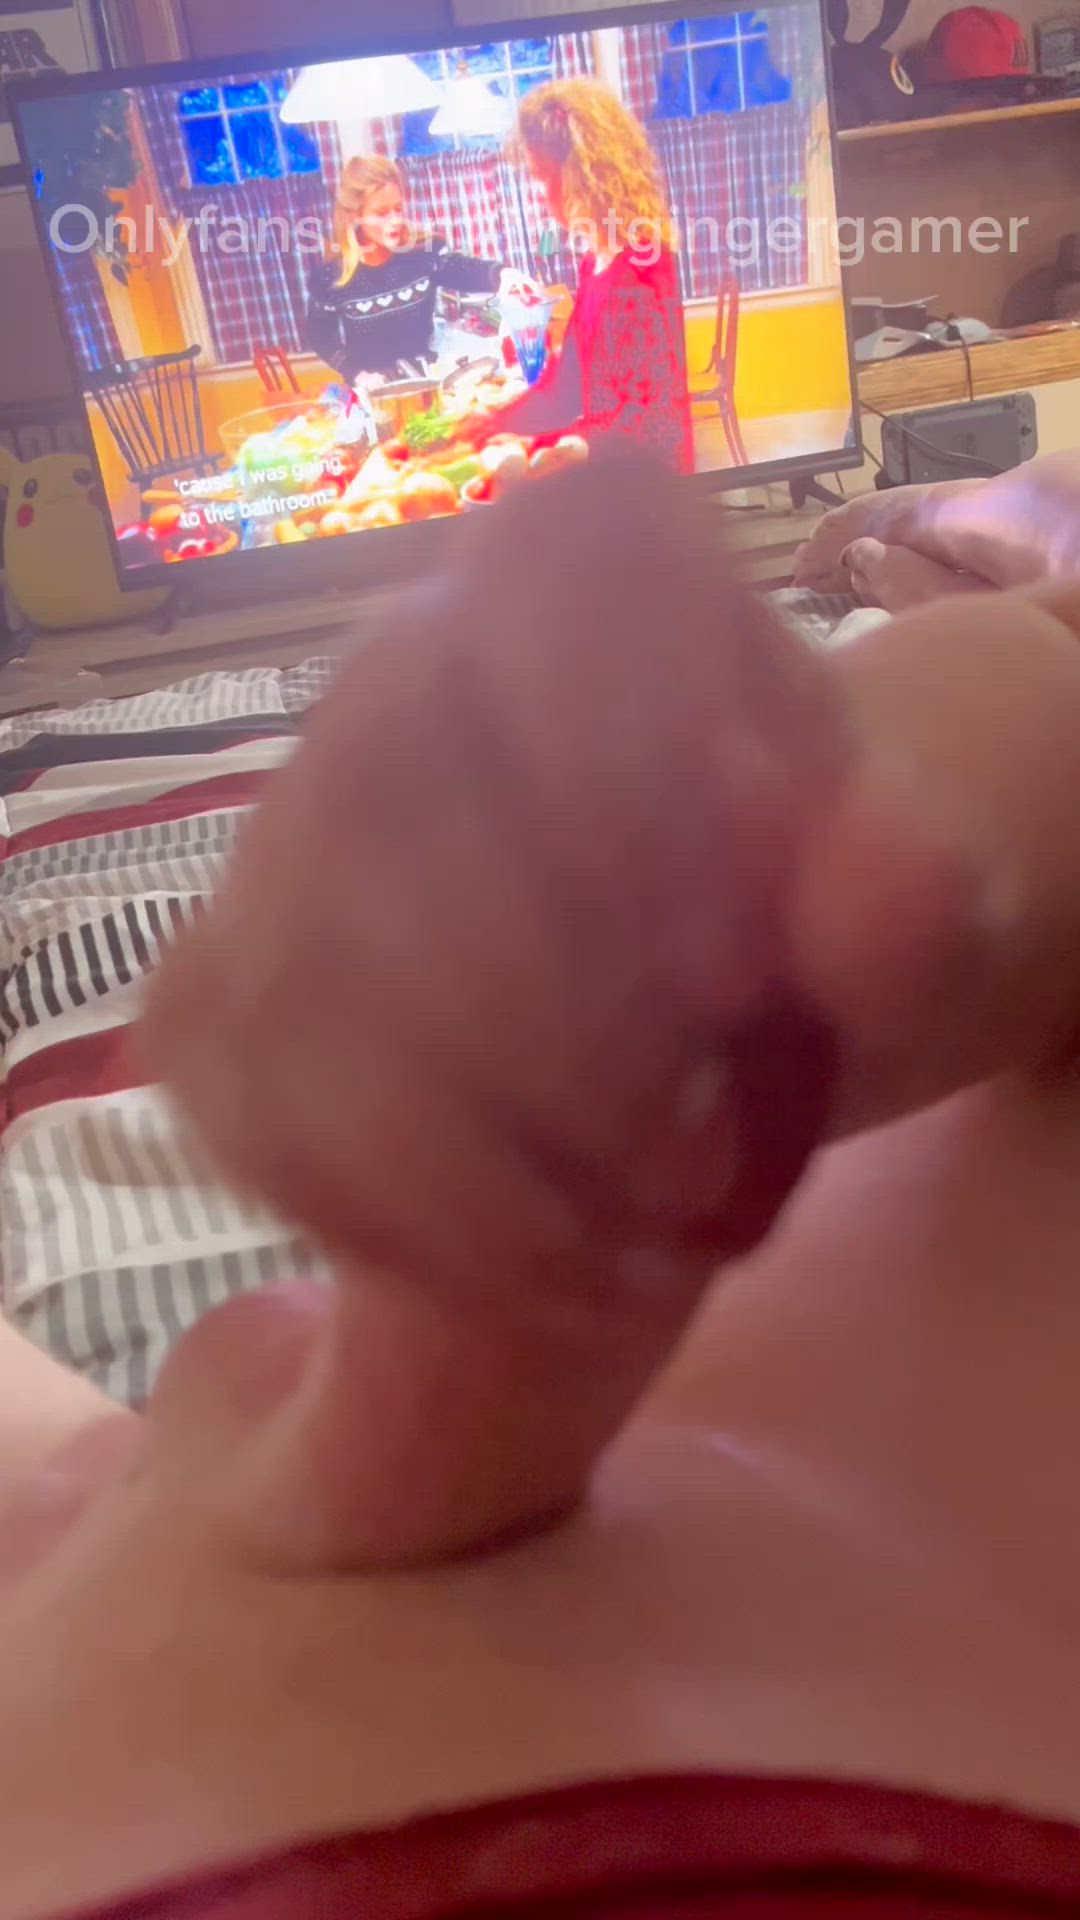 Amateur porn video with onlyfans model thatgingergamerr <strong>@thatgingergamer</strong>